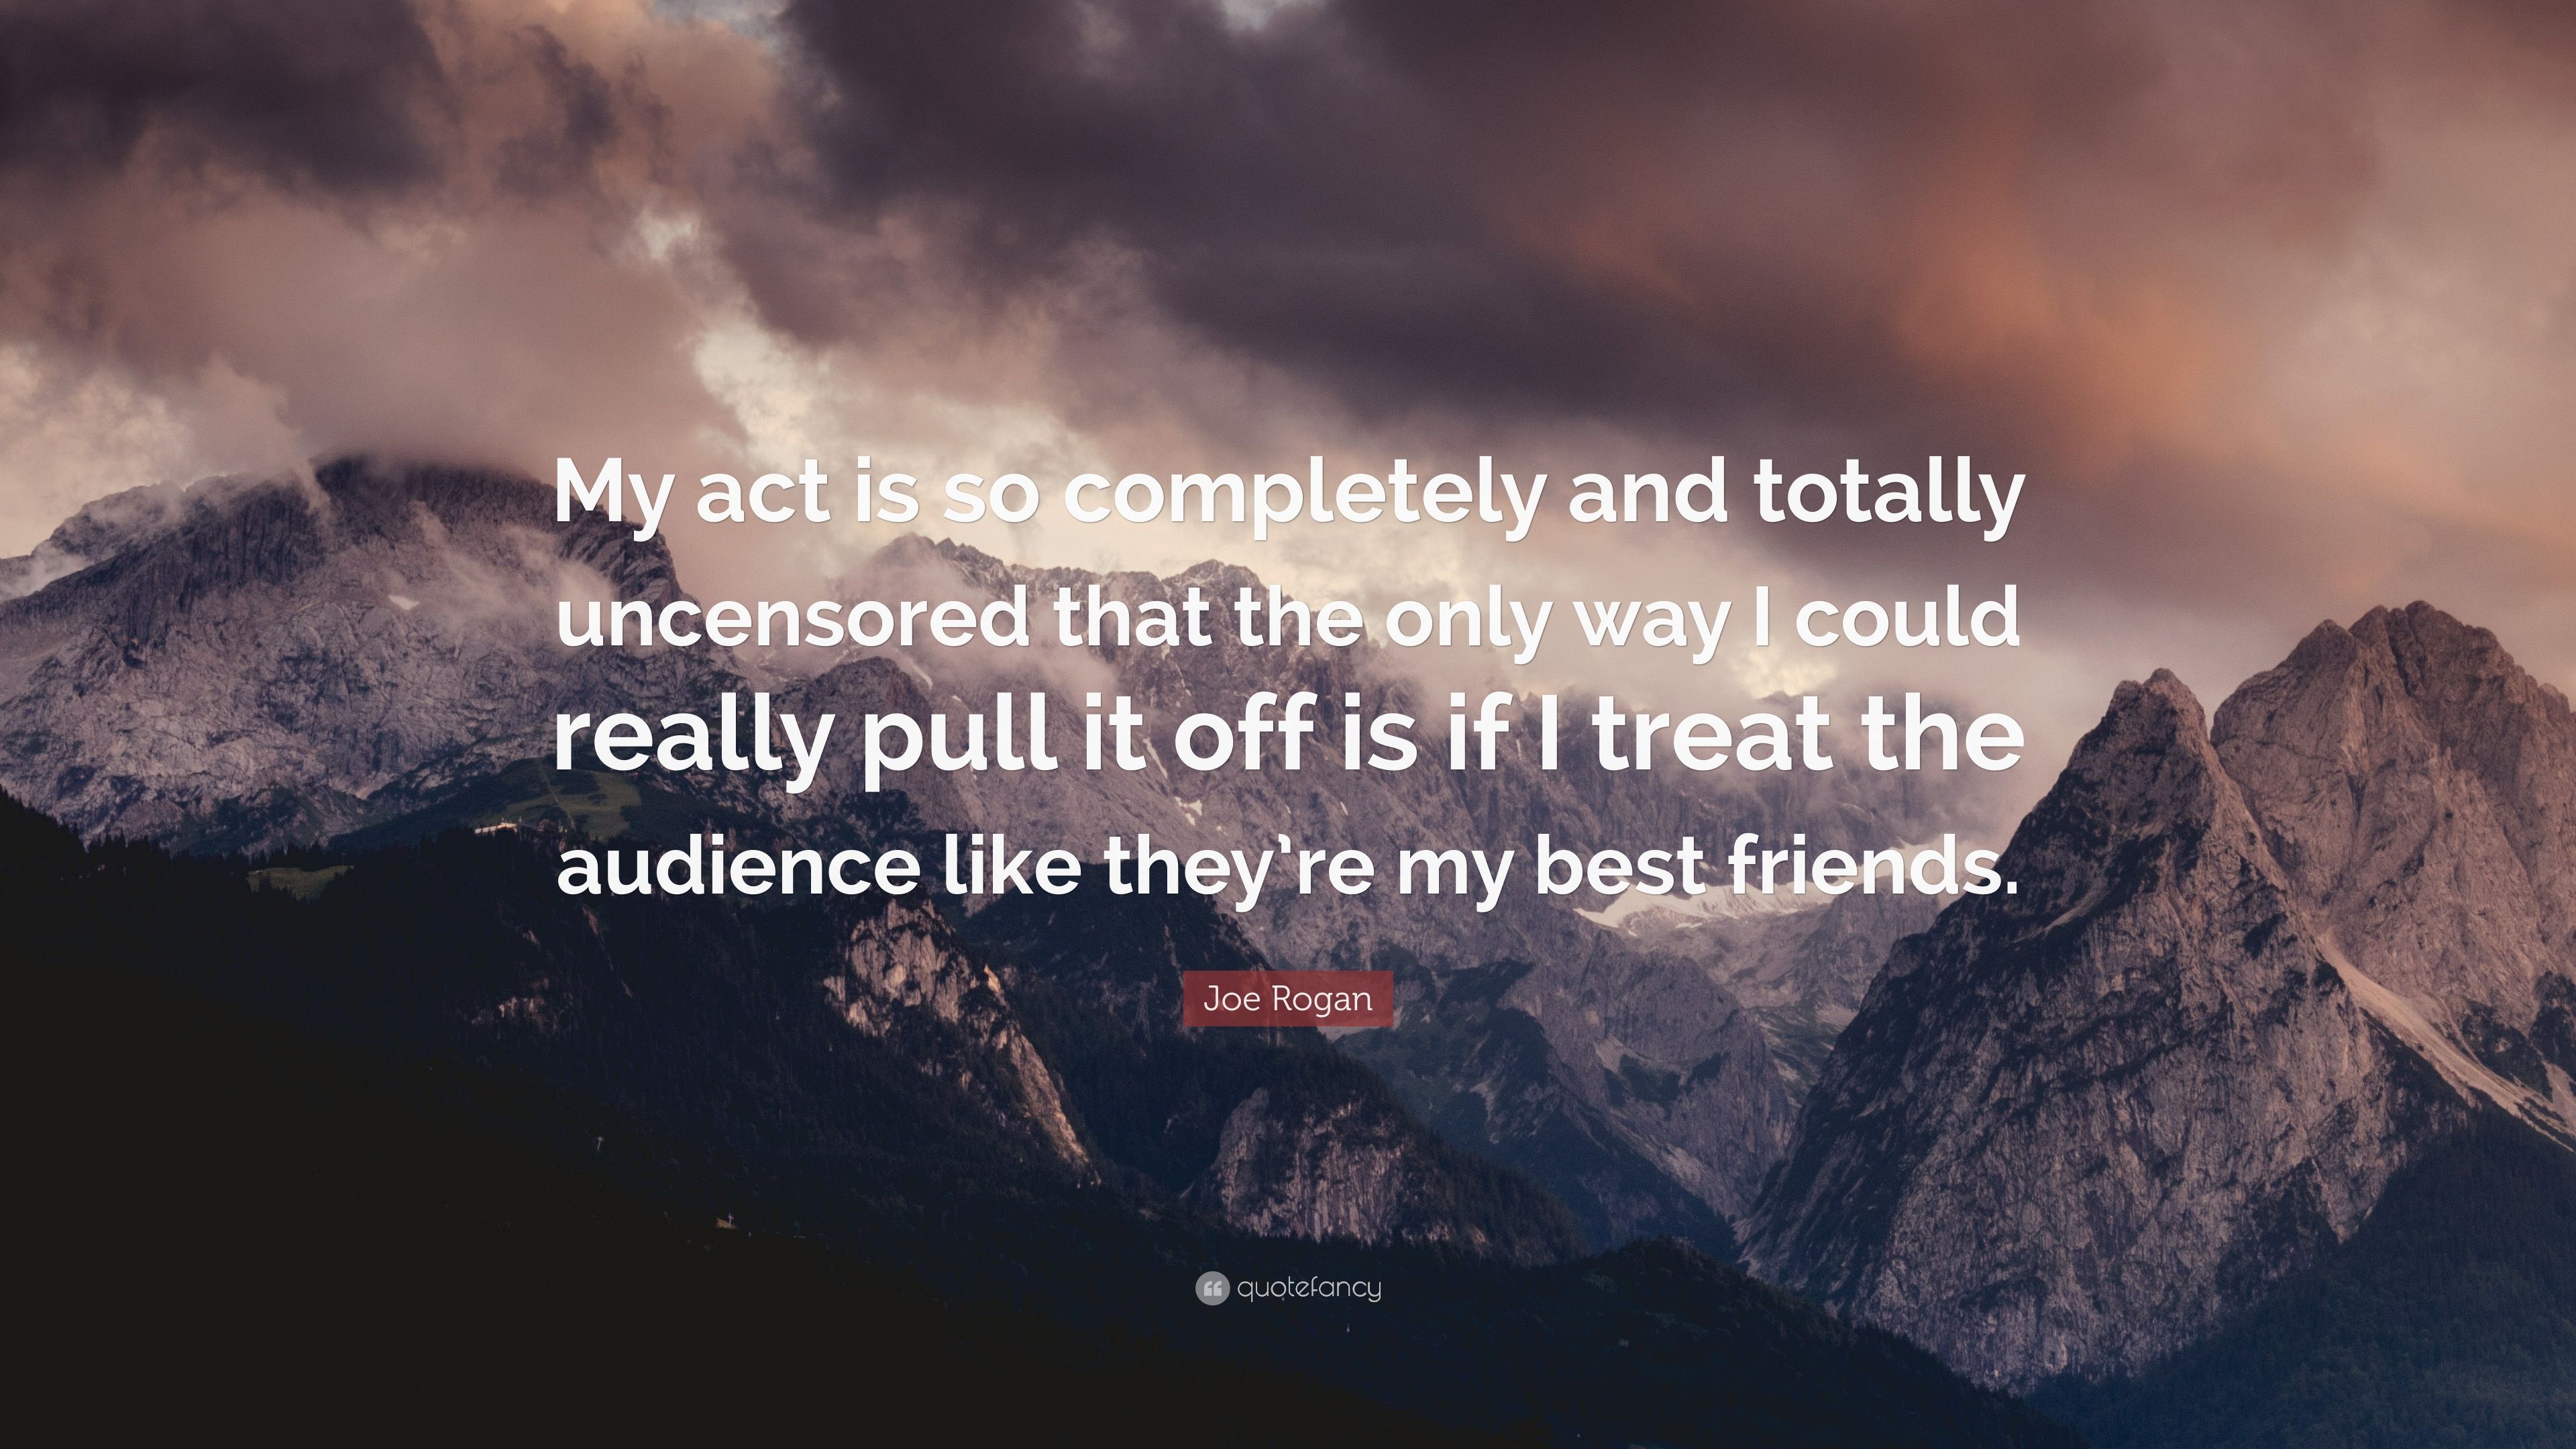 Joe Rogan Quote: “My act is so completely and totally uncensored that the only way I could really pull it off is if I treat the audience l.” (7 wallpaper)